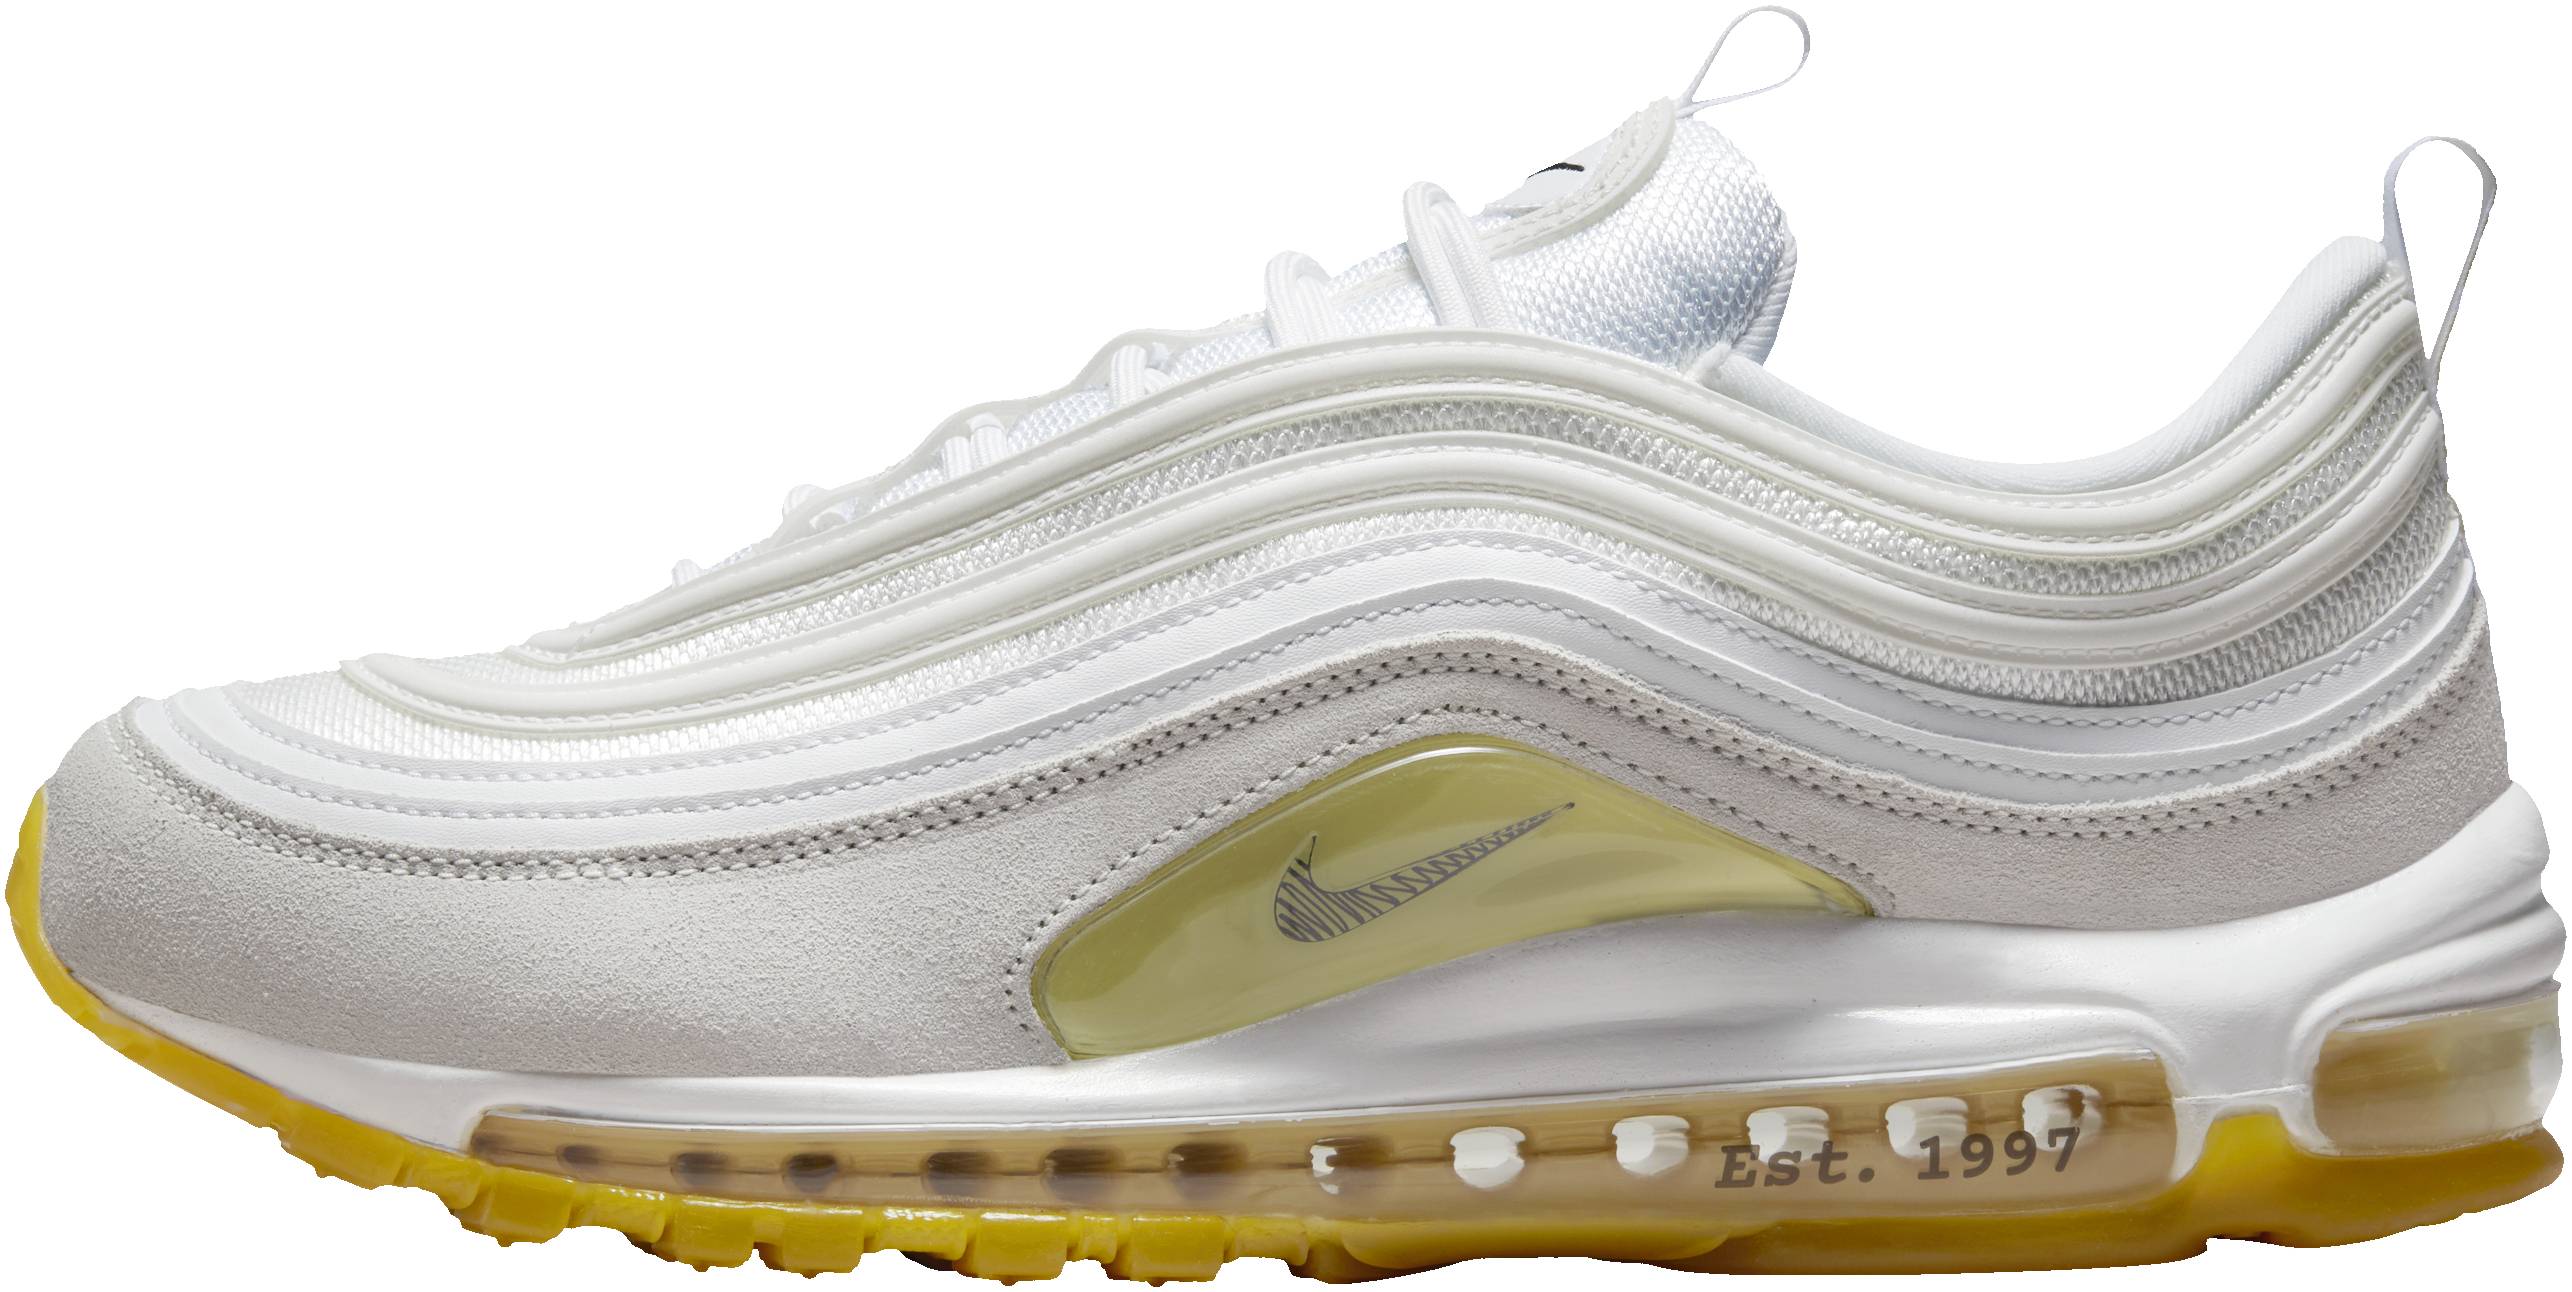 Out of date In the name Sidewalk 10+ Nike Air Max 97 sneakers: Save up to 42% | RunRepeat